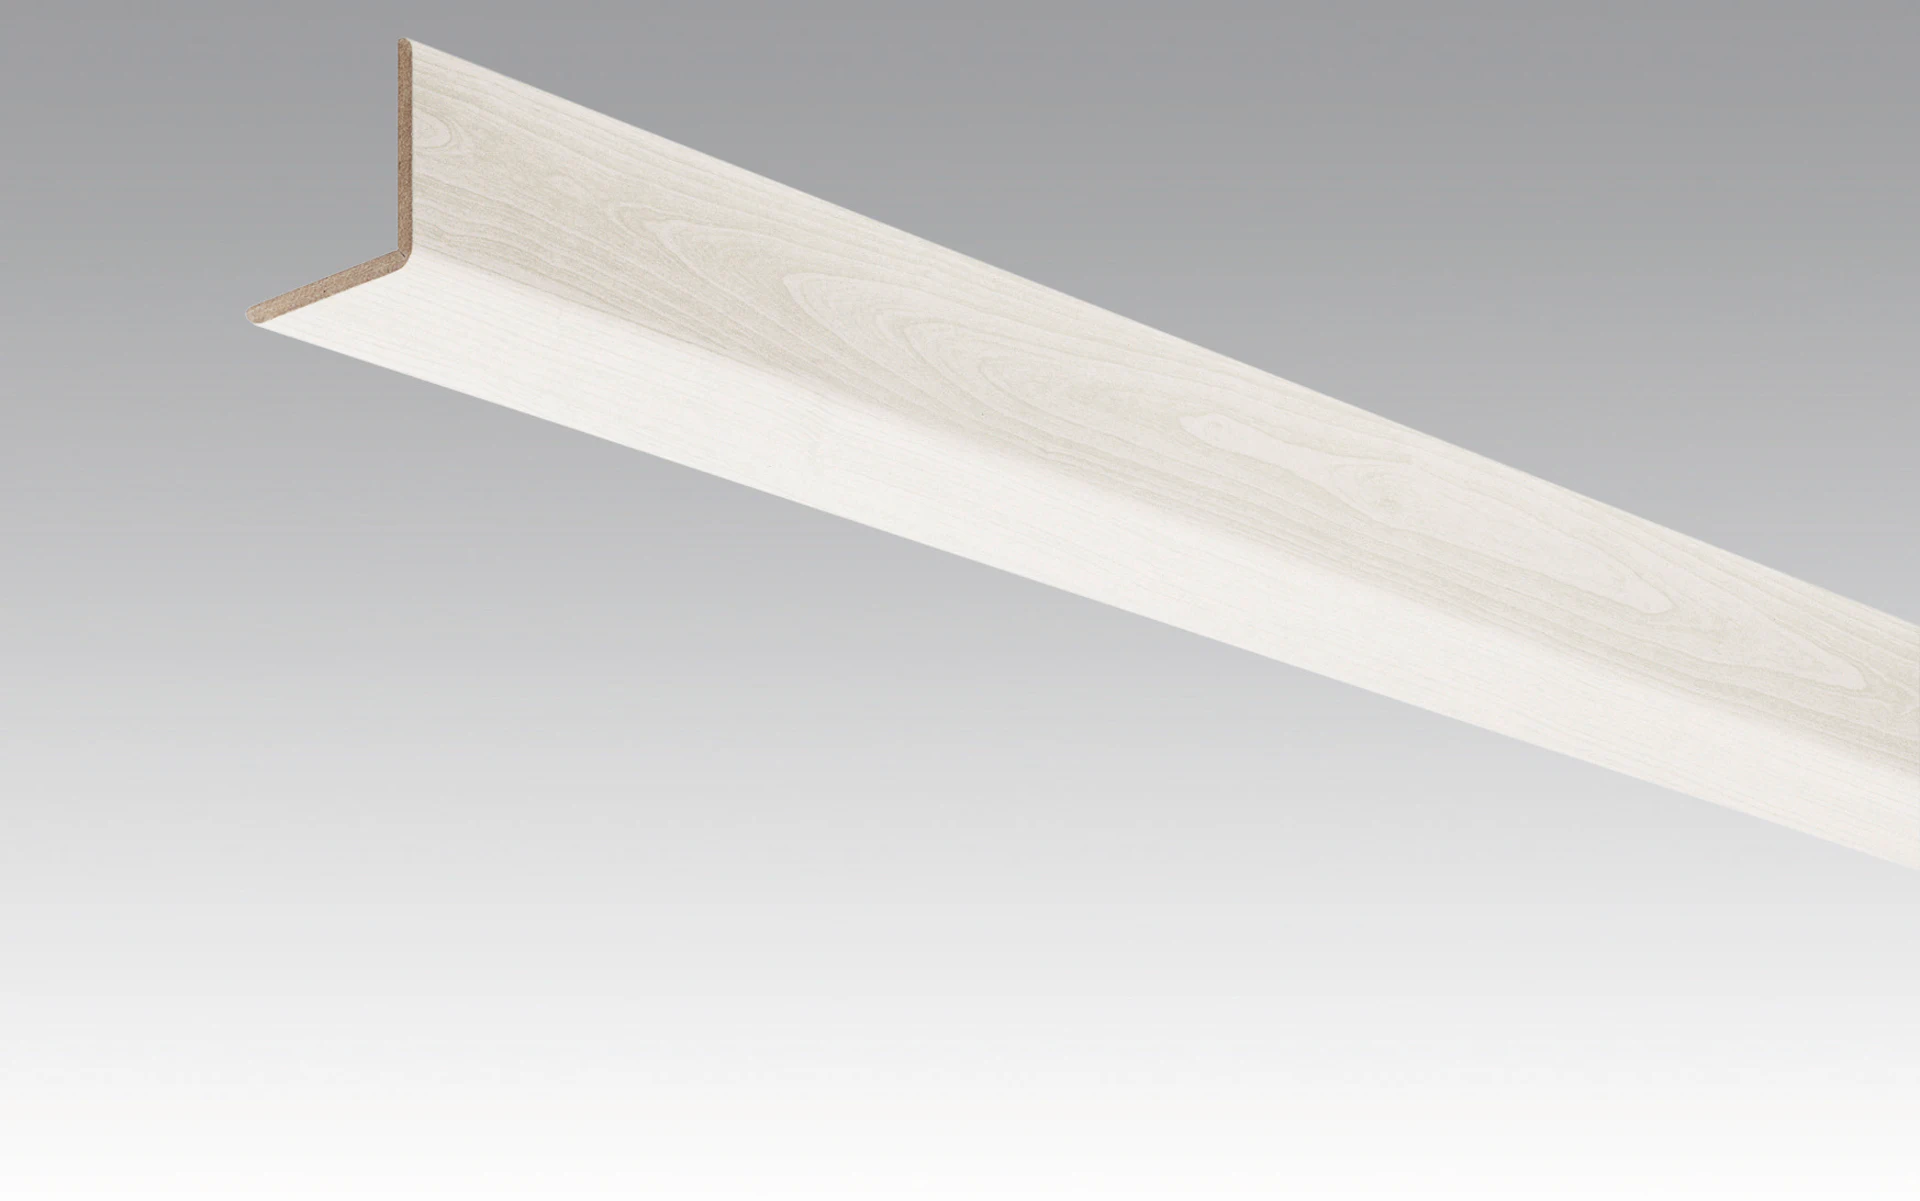 MEISTER Skirting Boards Angle Skirting Trentino Maple 328 - 2380 x 33 x 3.5 mm (200035-2380-00328)